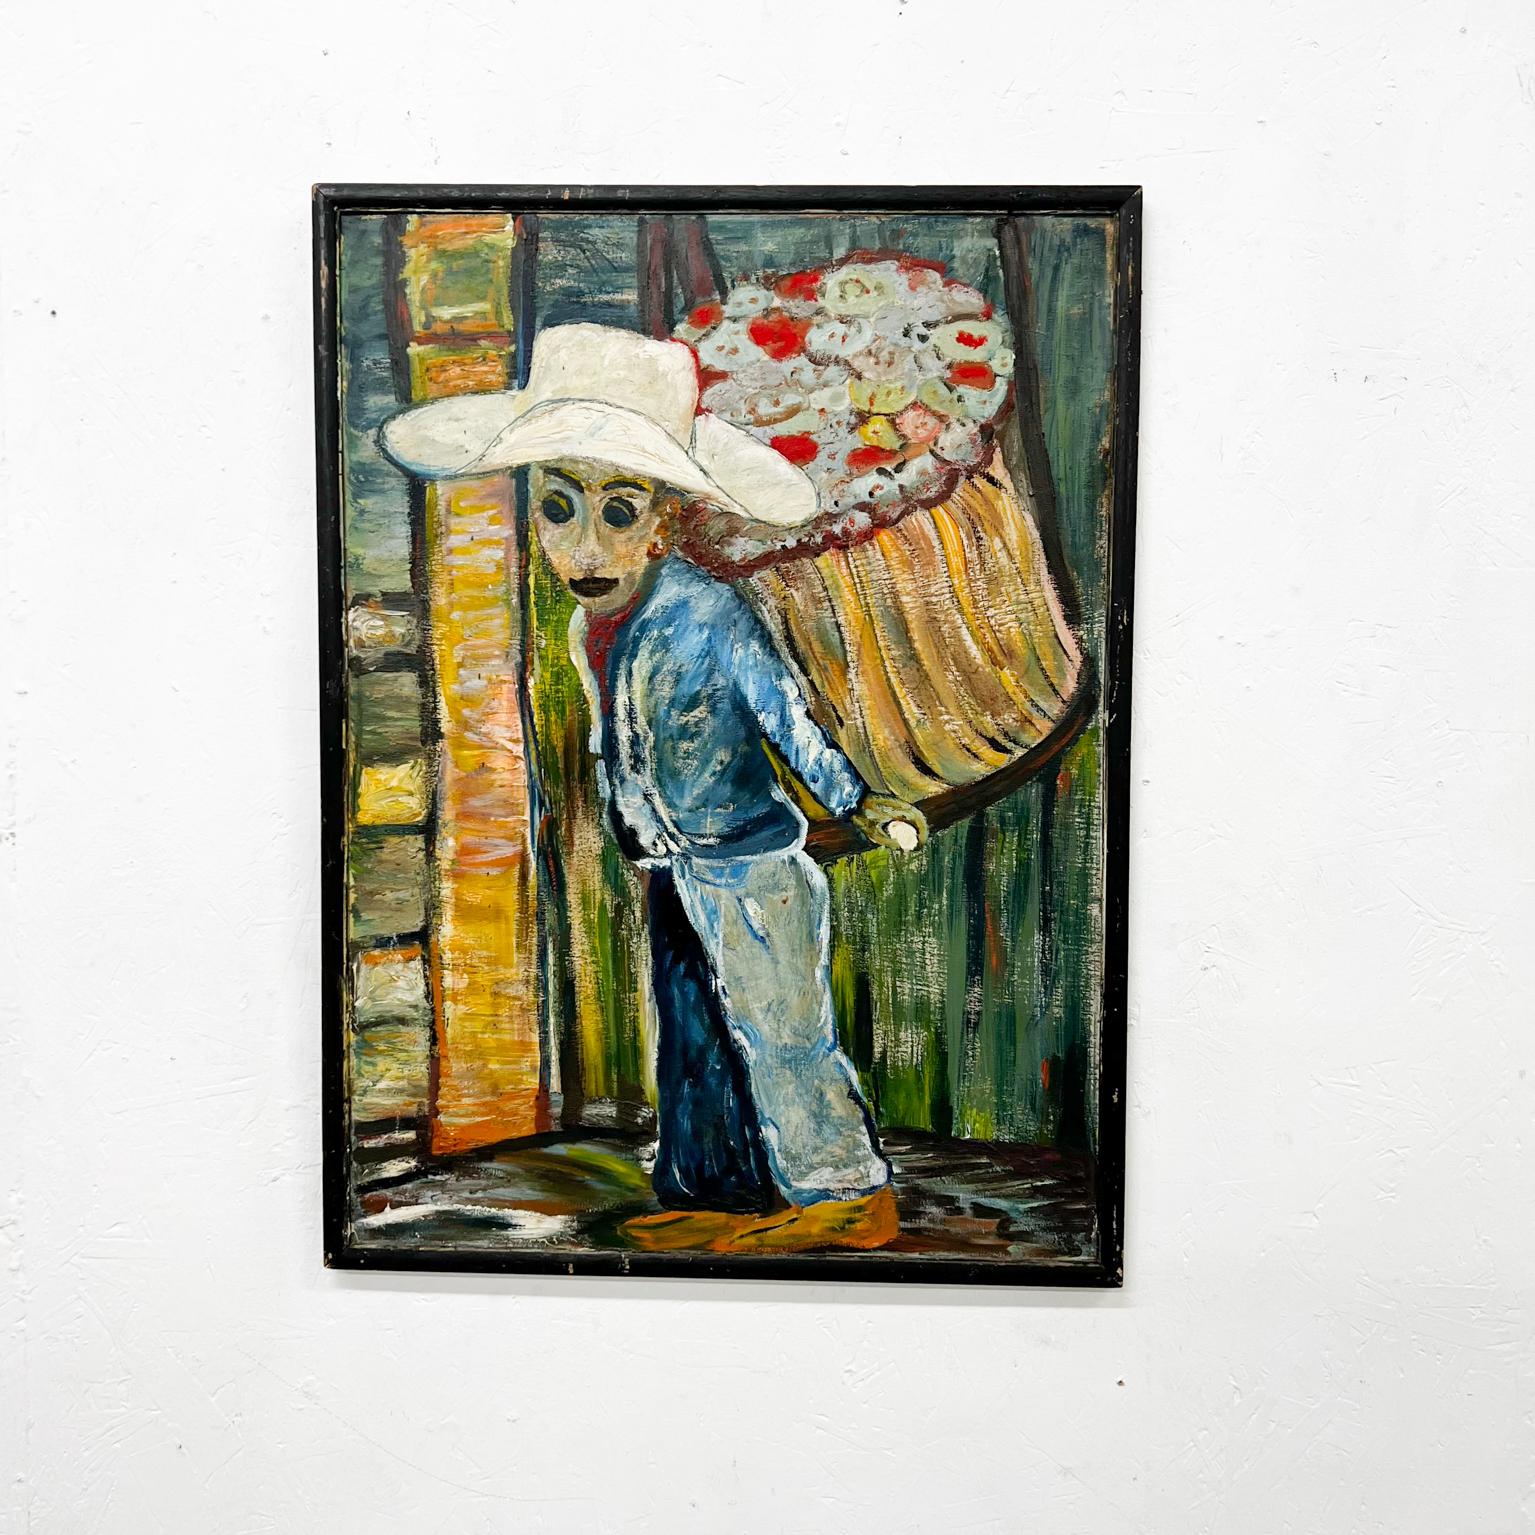 1970s Latin America art flower vendor.
Oil on wood Painting.
Unsigned.
23.25 x 31.25 x .88 D.
Preowned unrestored vintage condition.
See images provided.